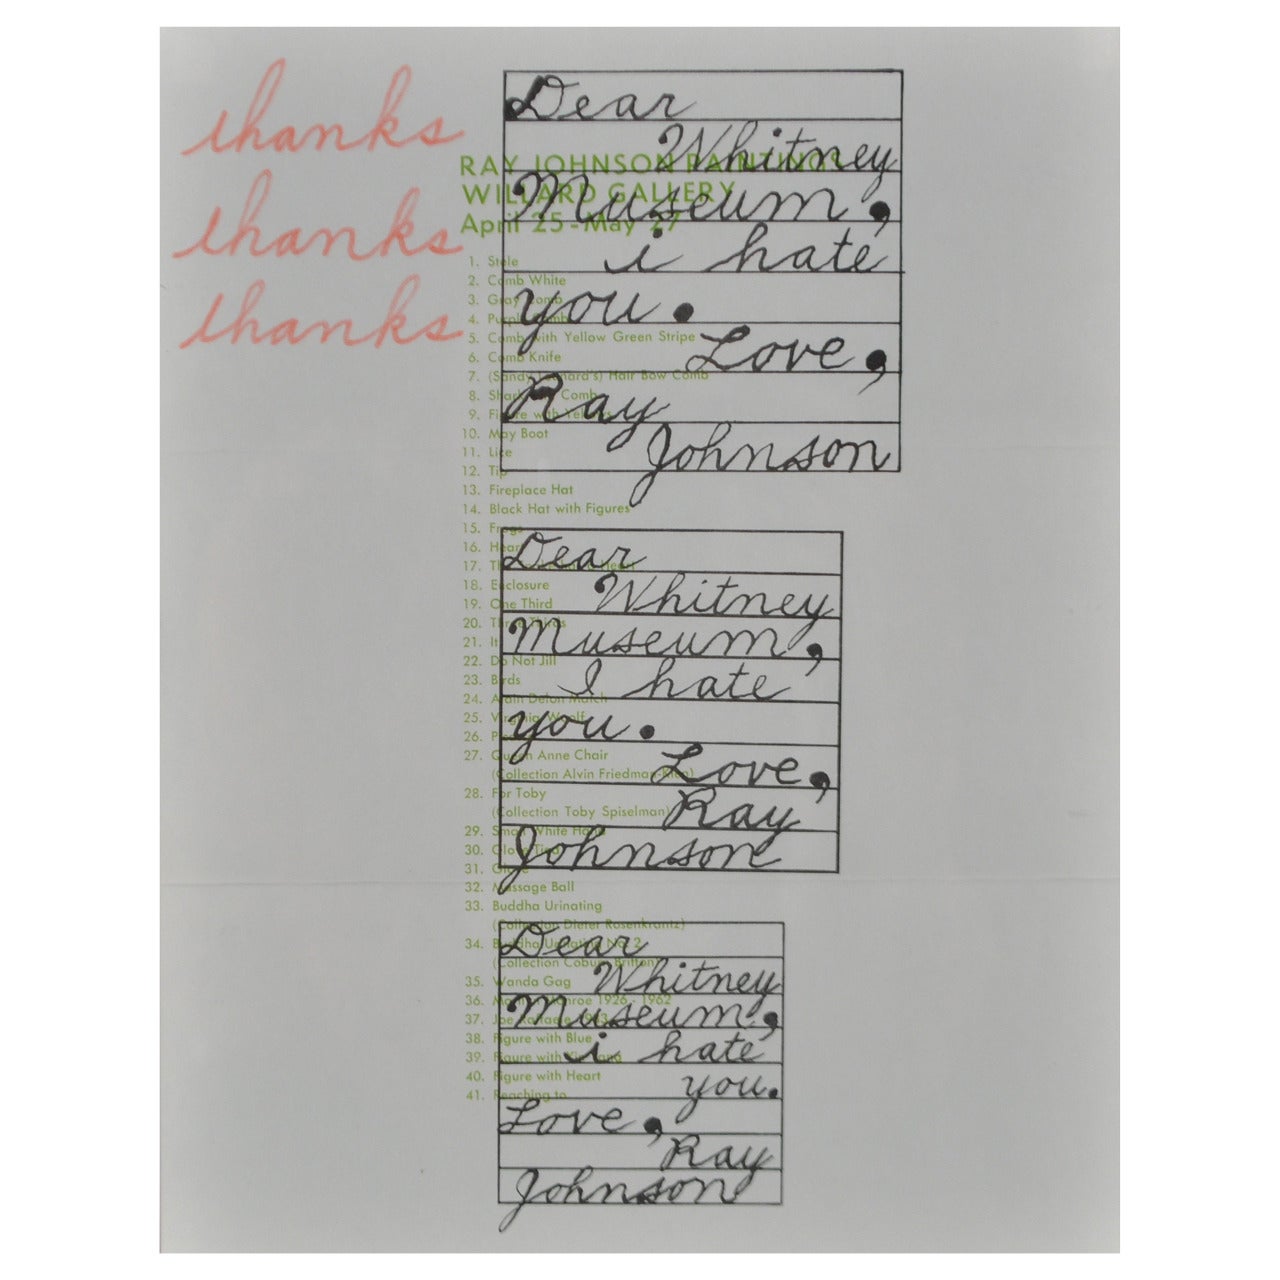 Ray Johnson, Mailer Art, "Dear Whitney Museum, I Hate You, Love Ray Johnson" For Sale